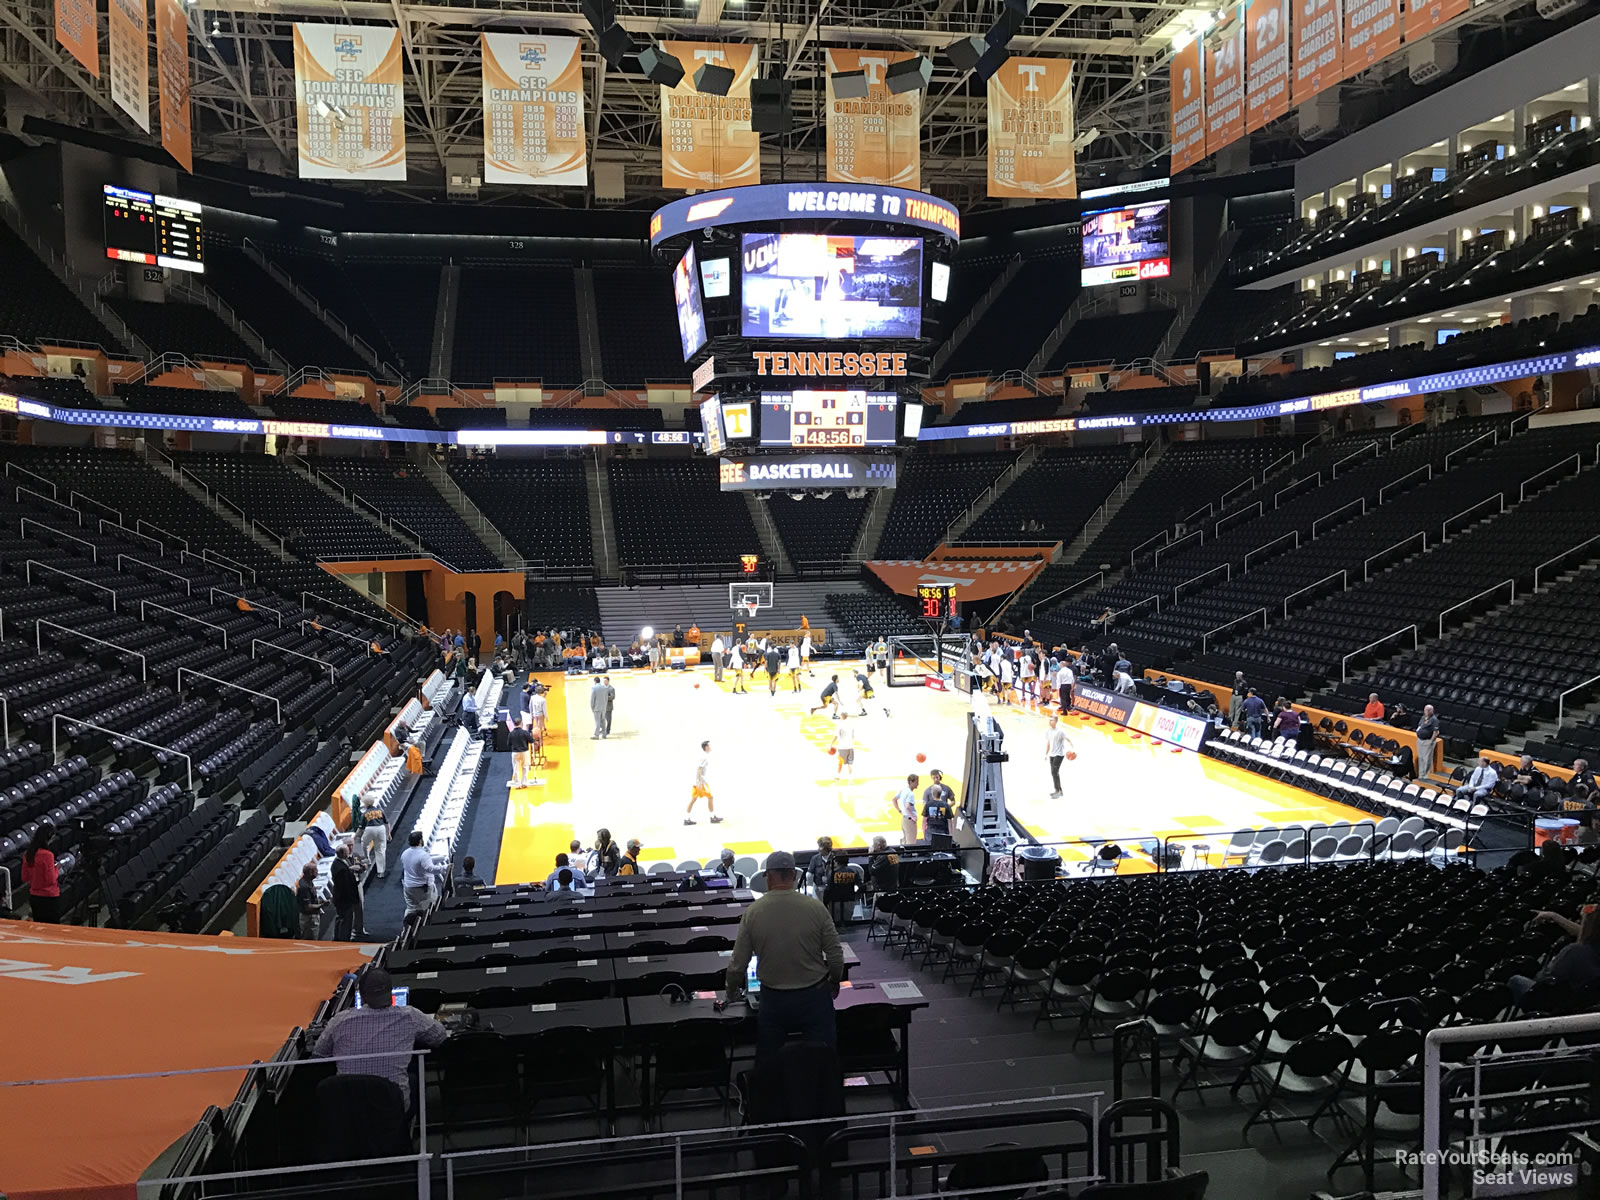 Thompson-Boling Arena Section 114 - RateYourSeats.com